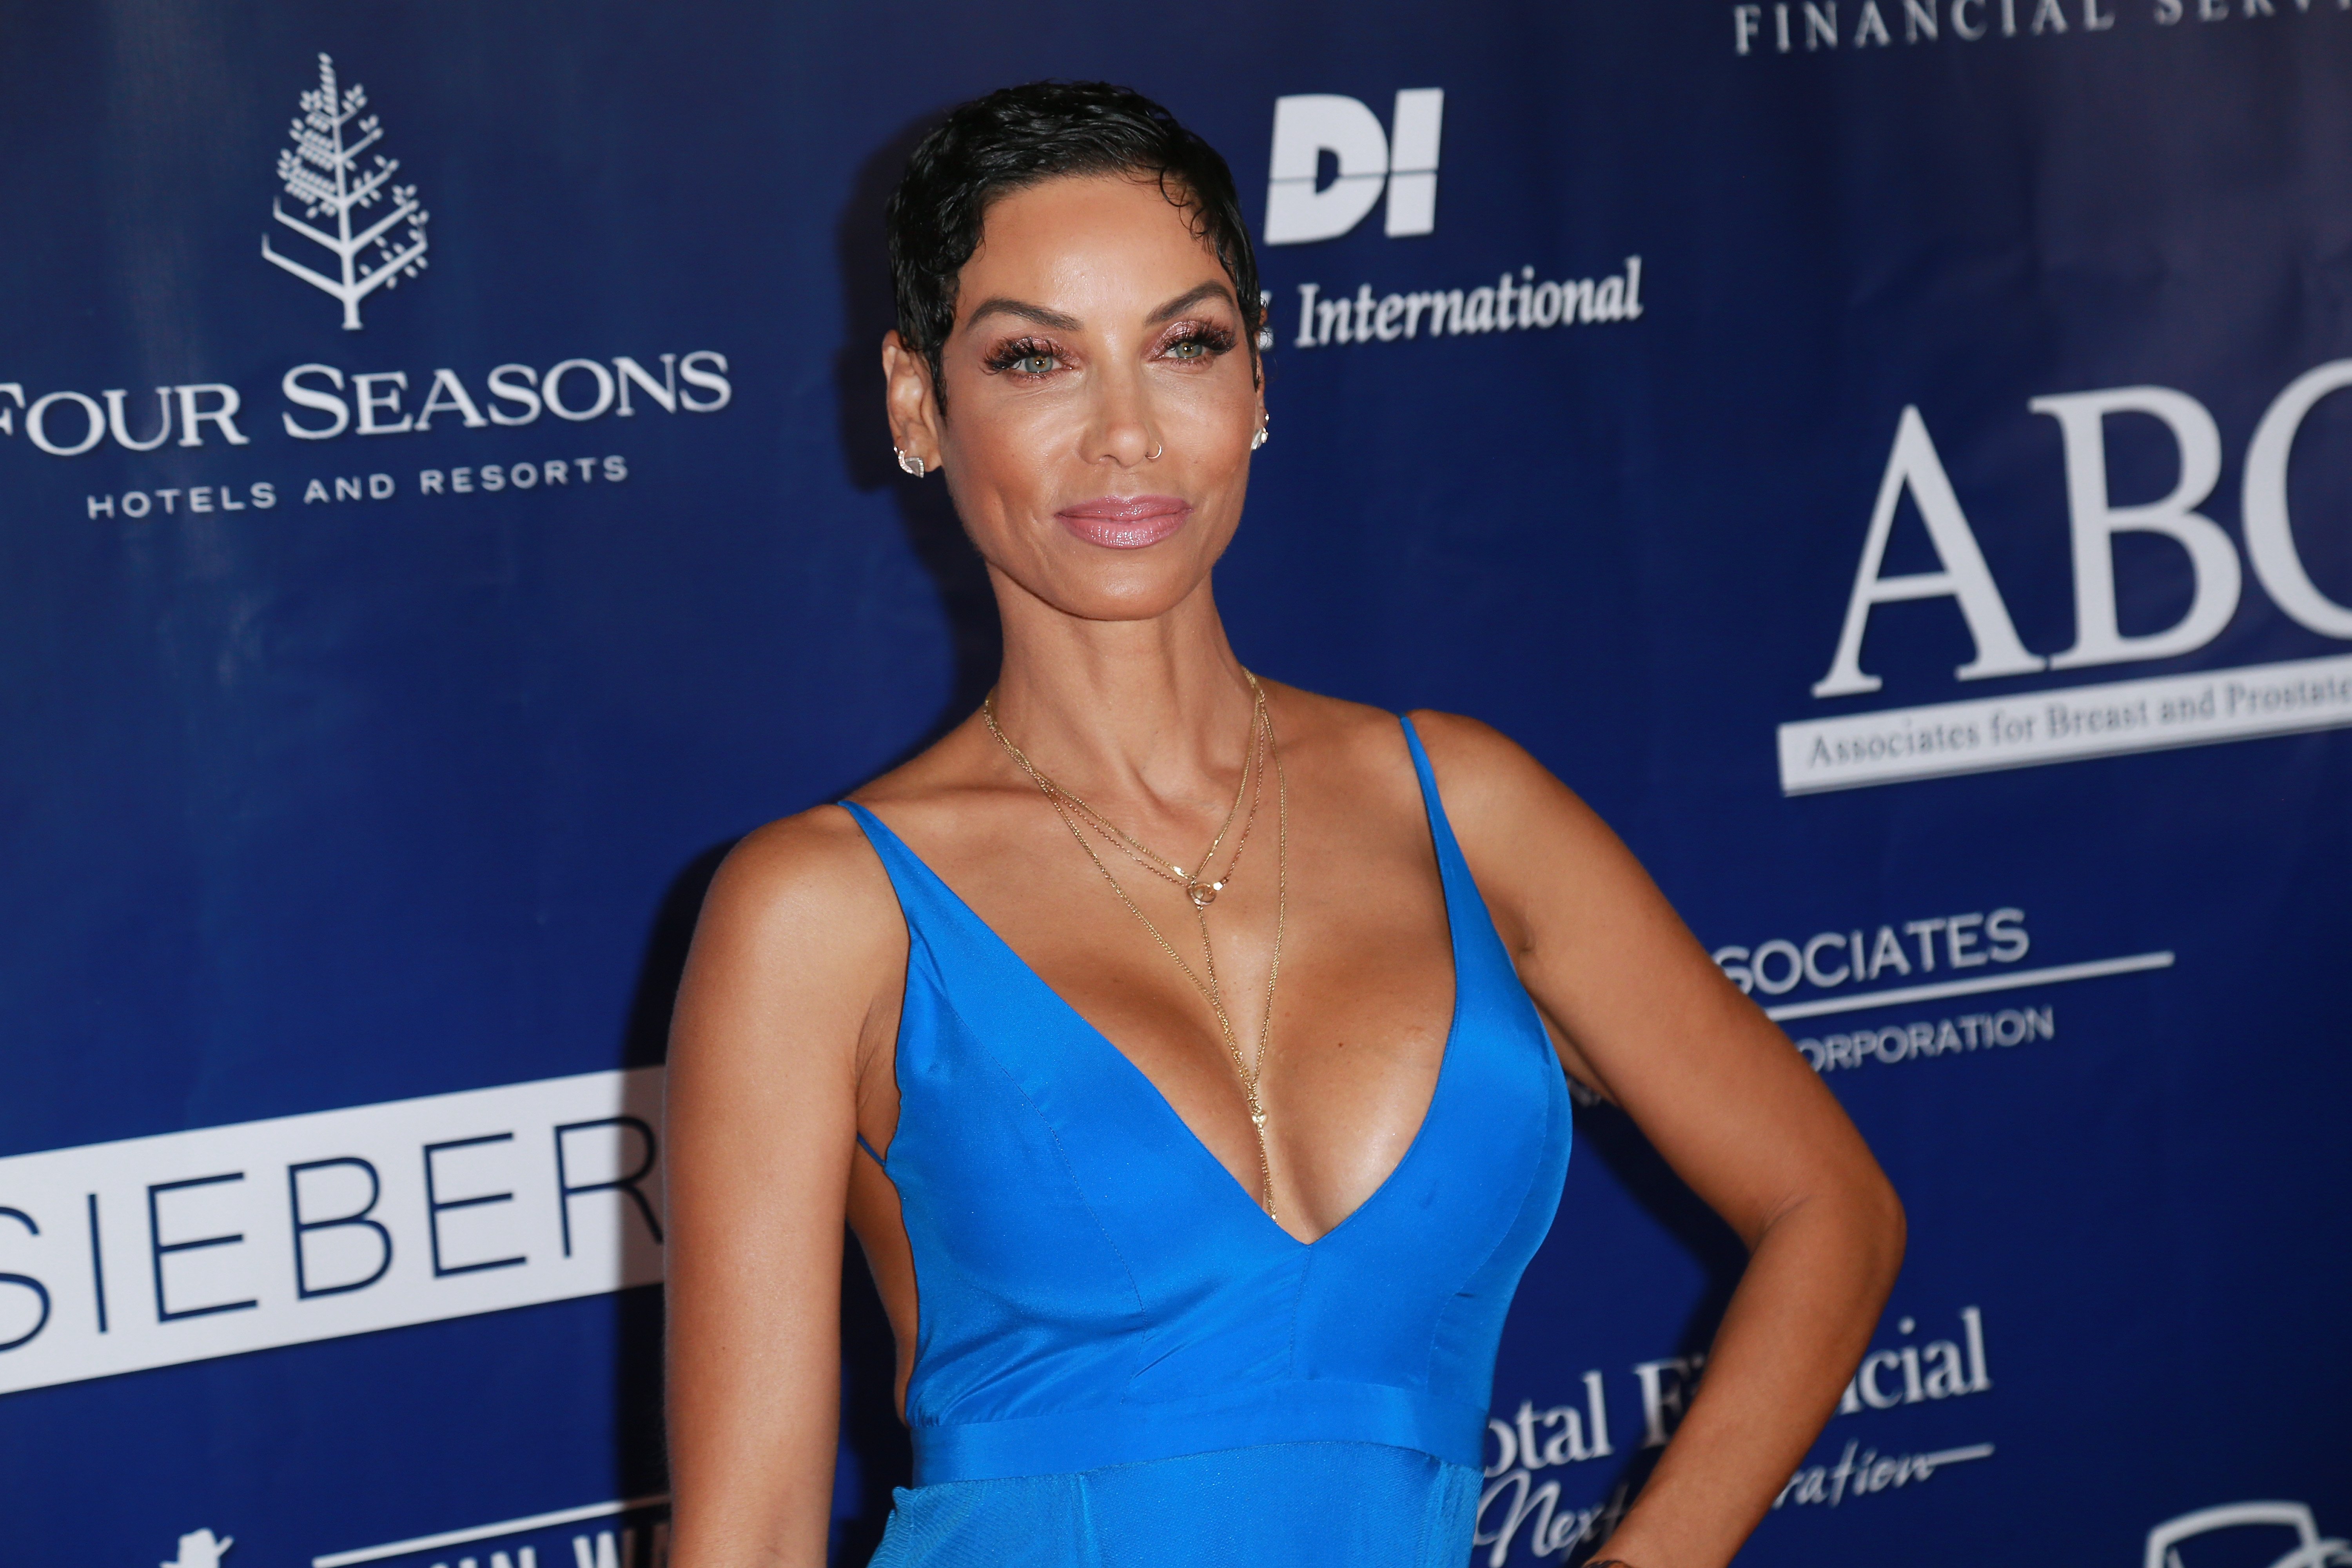 Nicole Murphy at the 28th Annual Talk Of The Town Gala on Nov. 18, 2017 in California | Photo: Getty Images